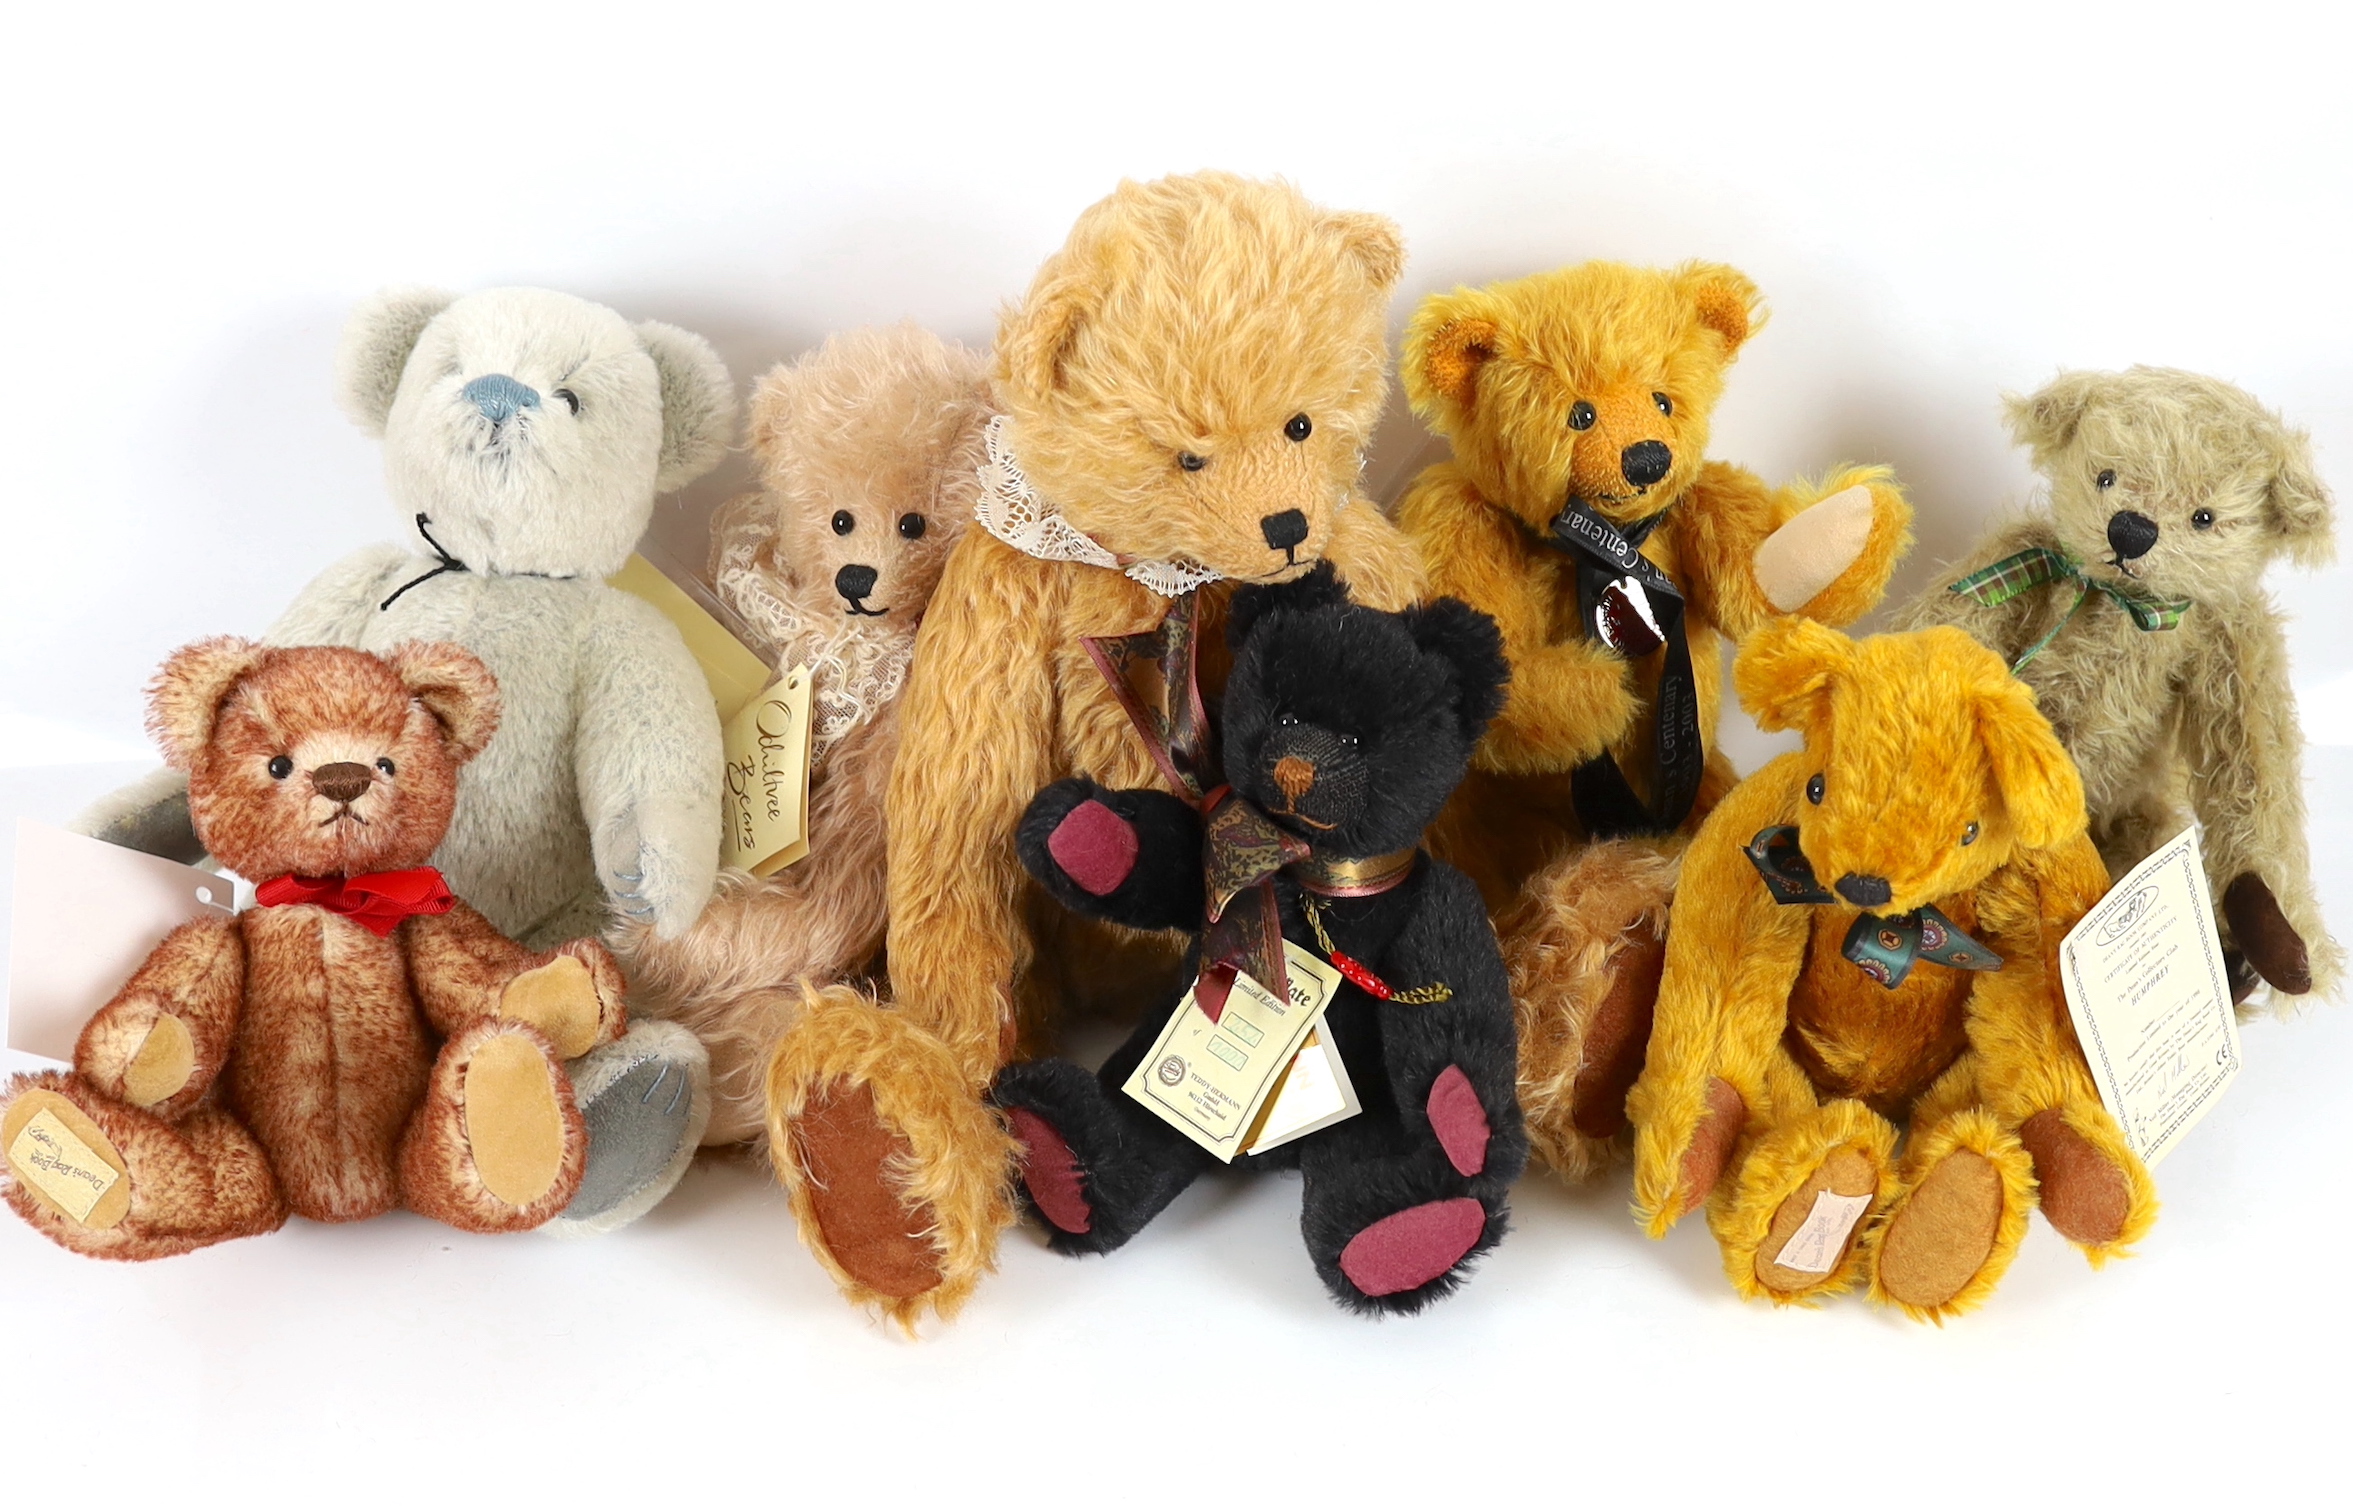 Five Deans bears, one Herman bear and two Artist bears (8)                                                                                                                                                                  